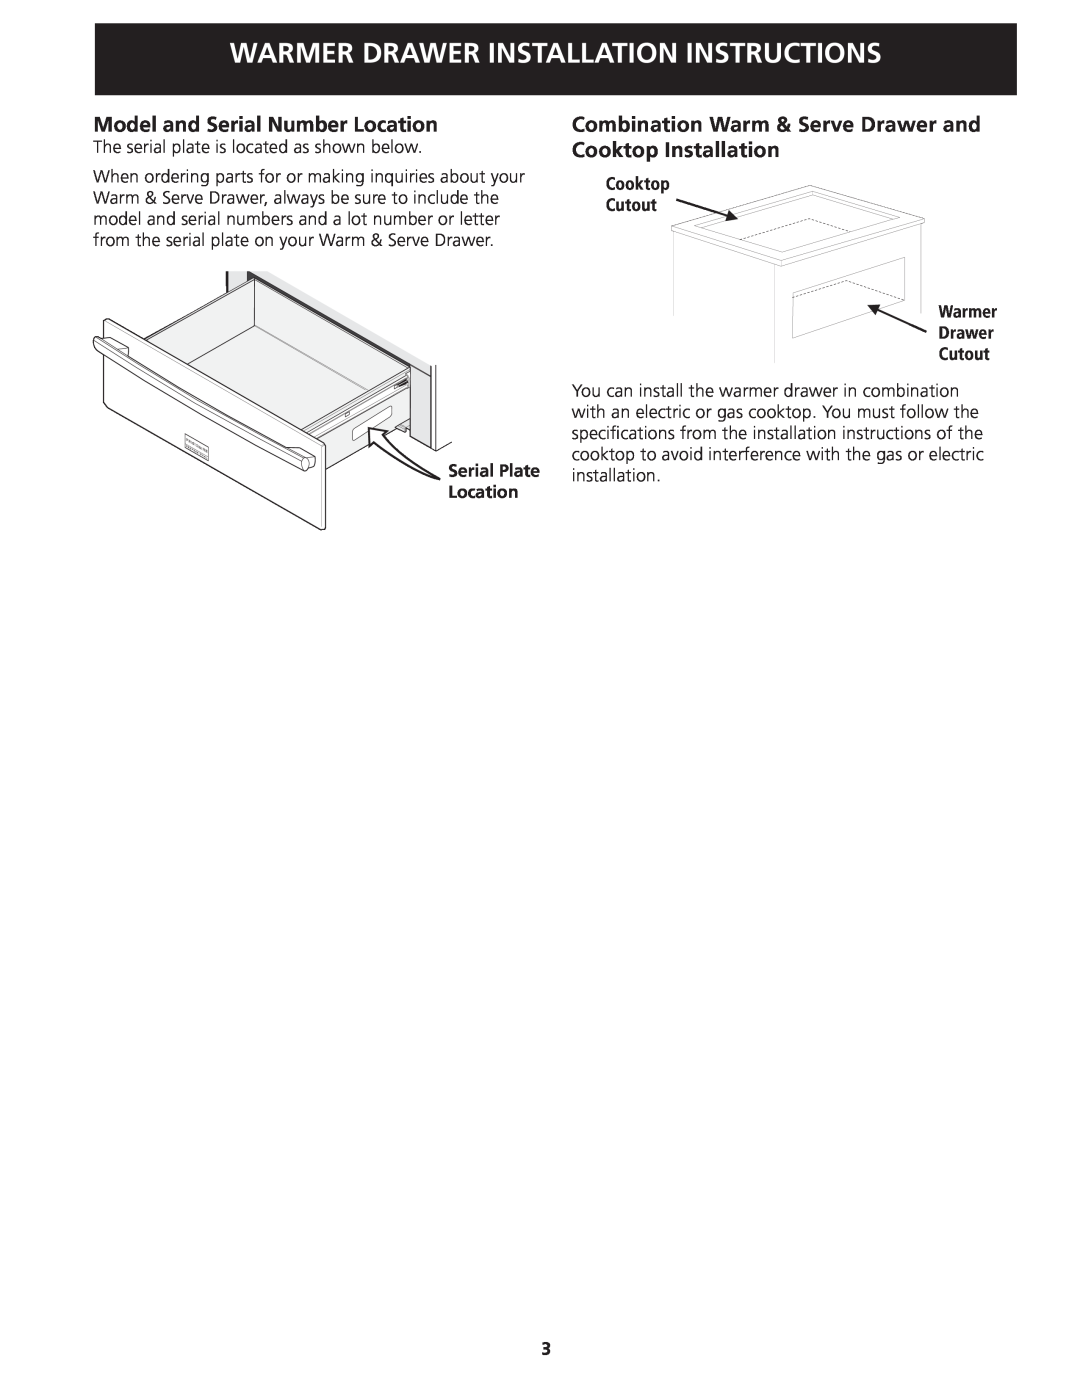 Frigidaire 318201822 Model and Serial Number Location, Warmer Drawer Installation Instructions, Serial Plate Location 